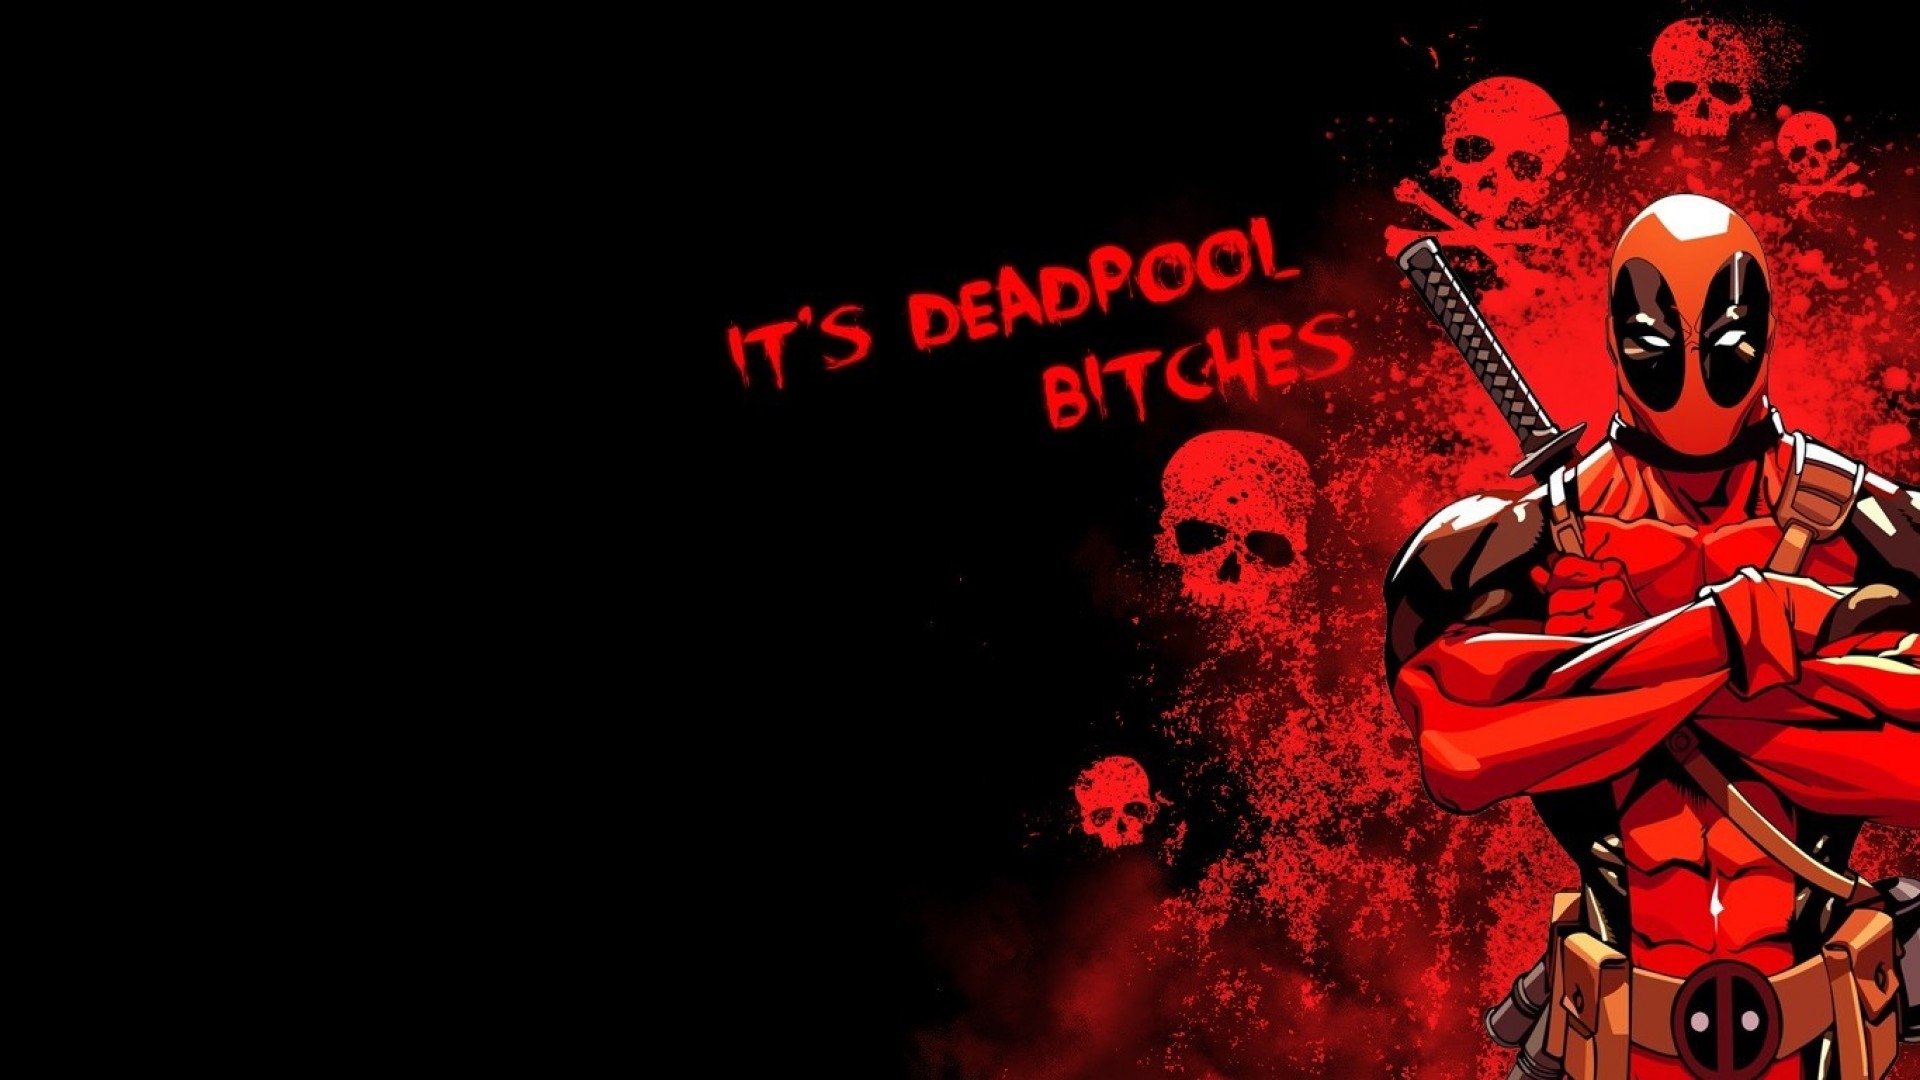 Deadpool Wallpaper HD - HD Wallpapers Backgrounds of Your Choice